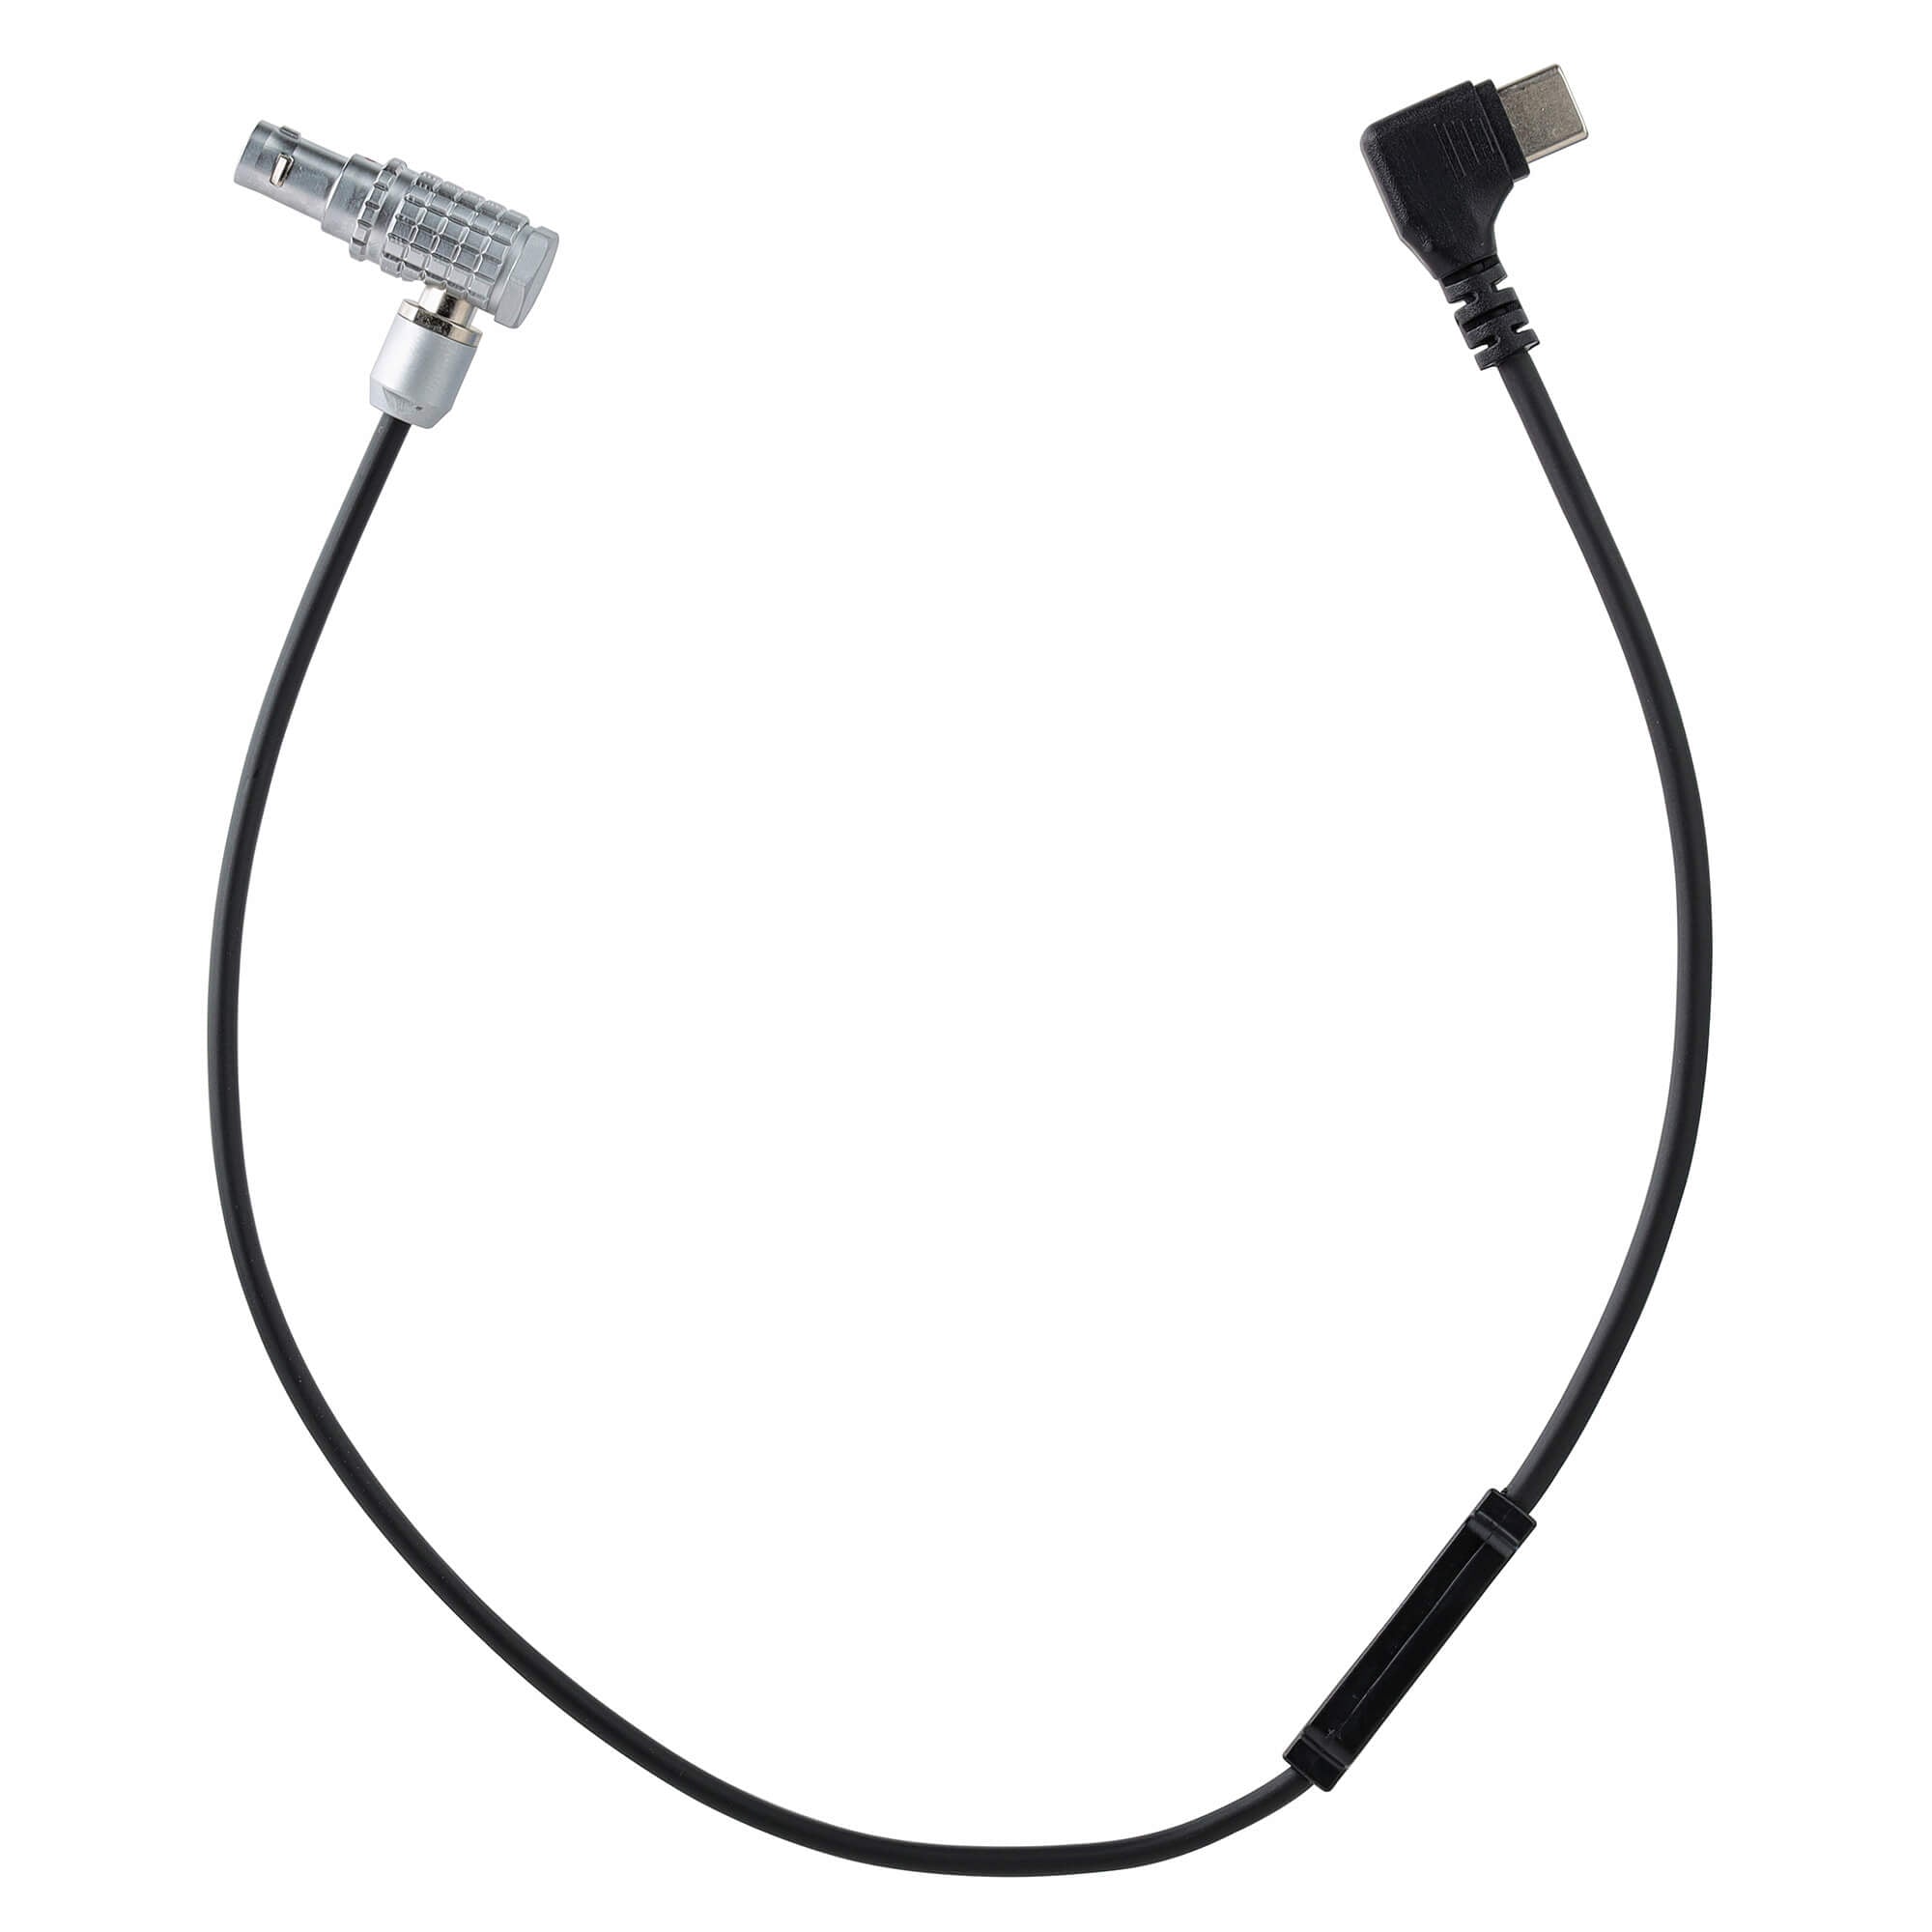 DJI Ronin S2 to RED Komodo recording control cable